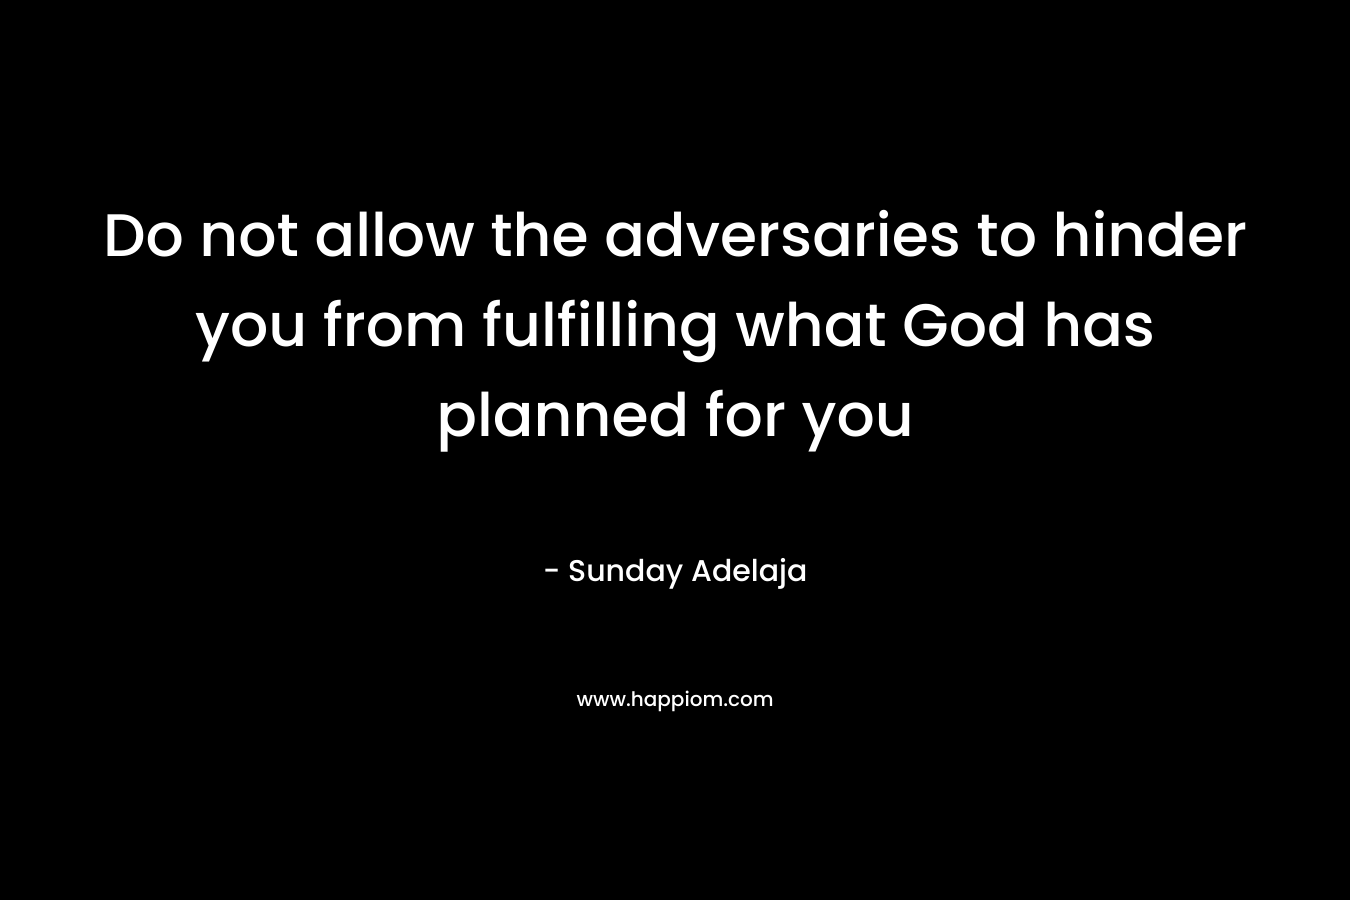 Do not allow the adversaries to hinder you from fulfilling what God has planned for you – Sunday Adelaja